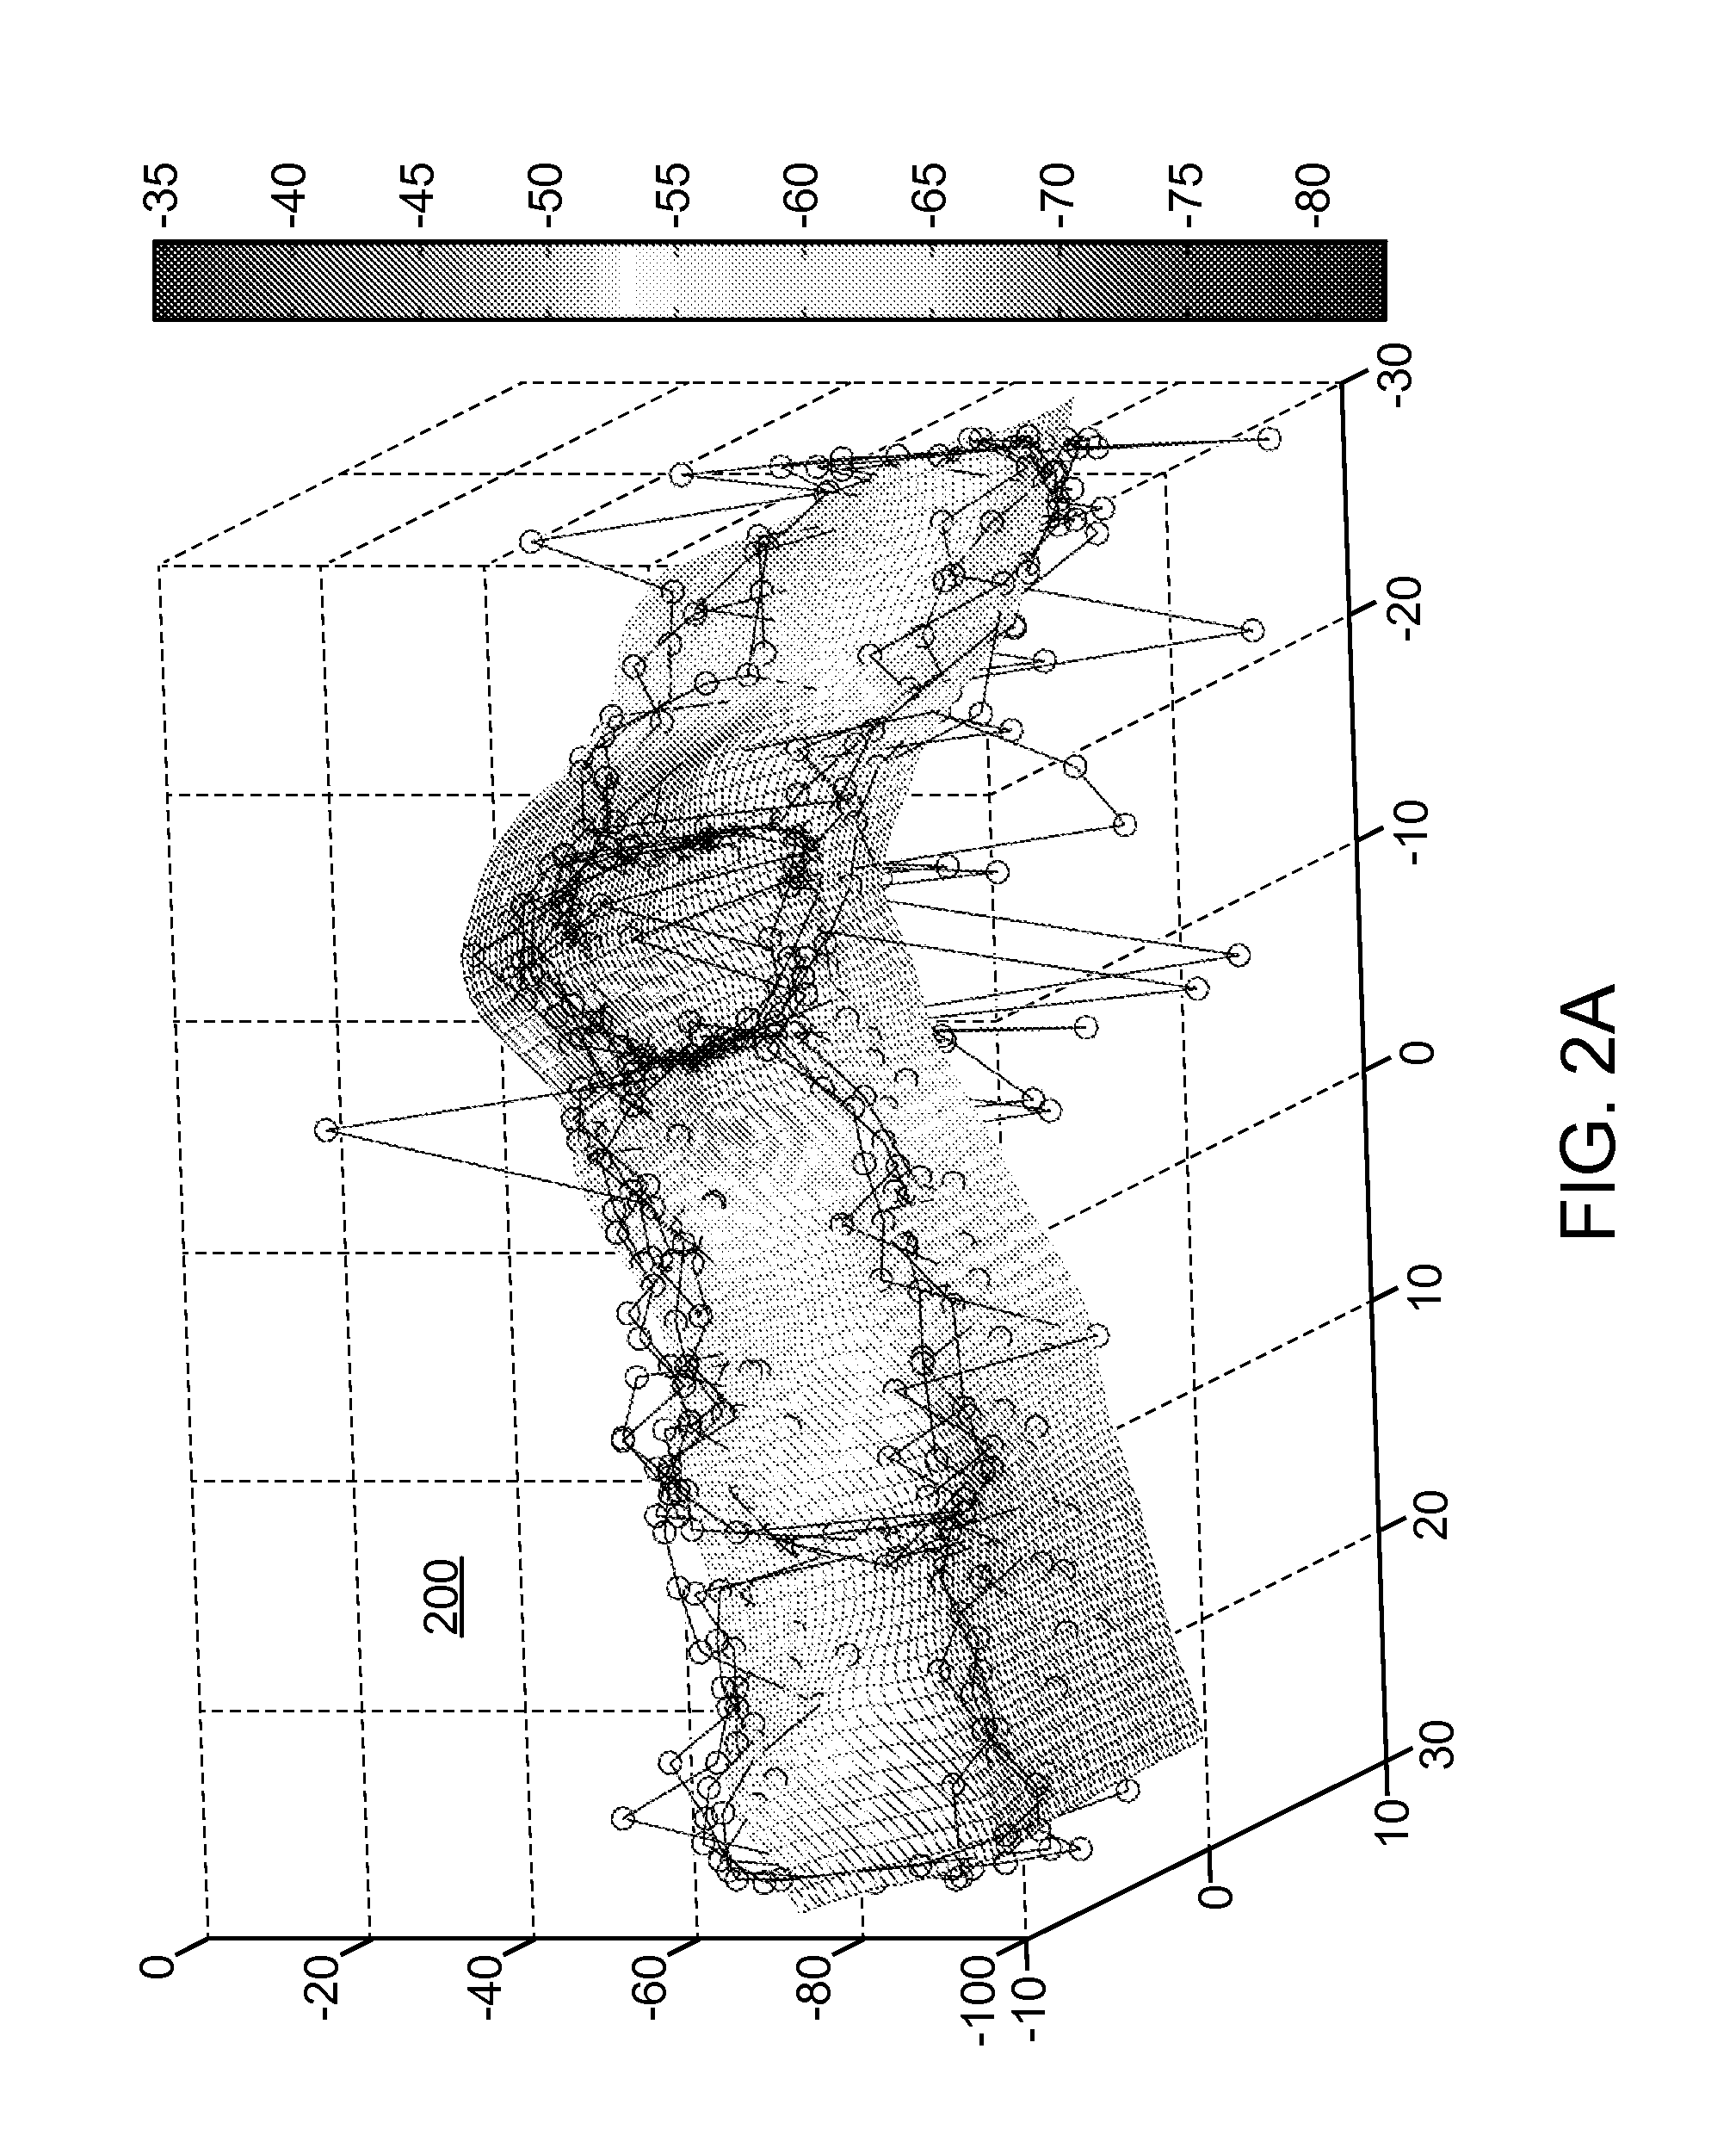 Method and System for Signal-based Localization